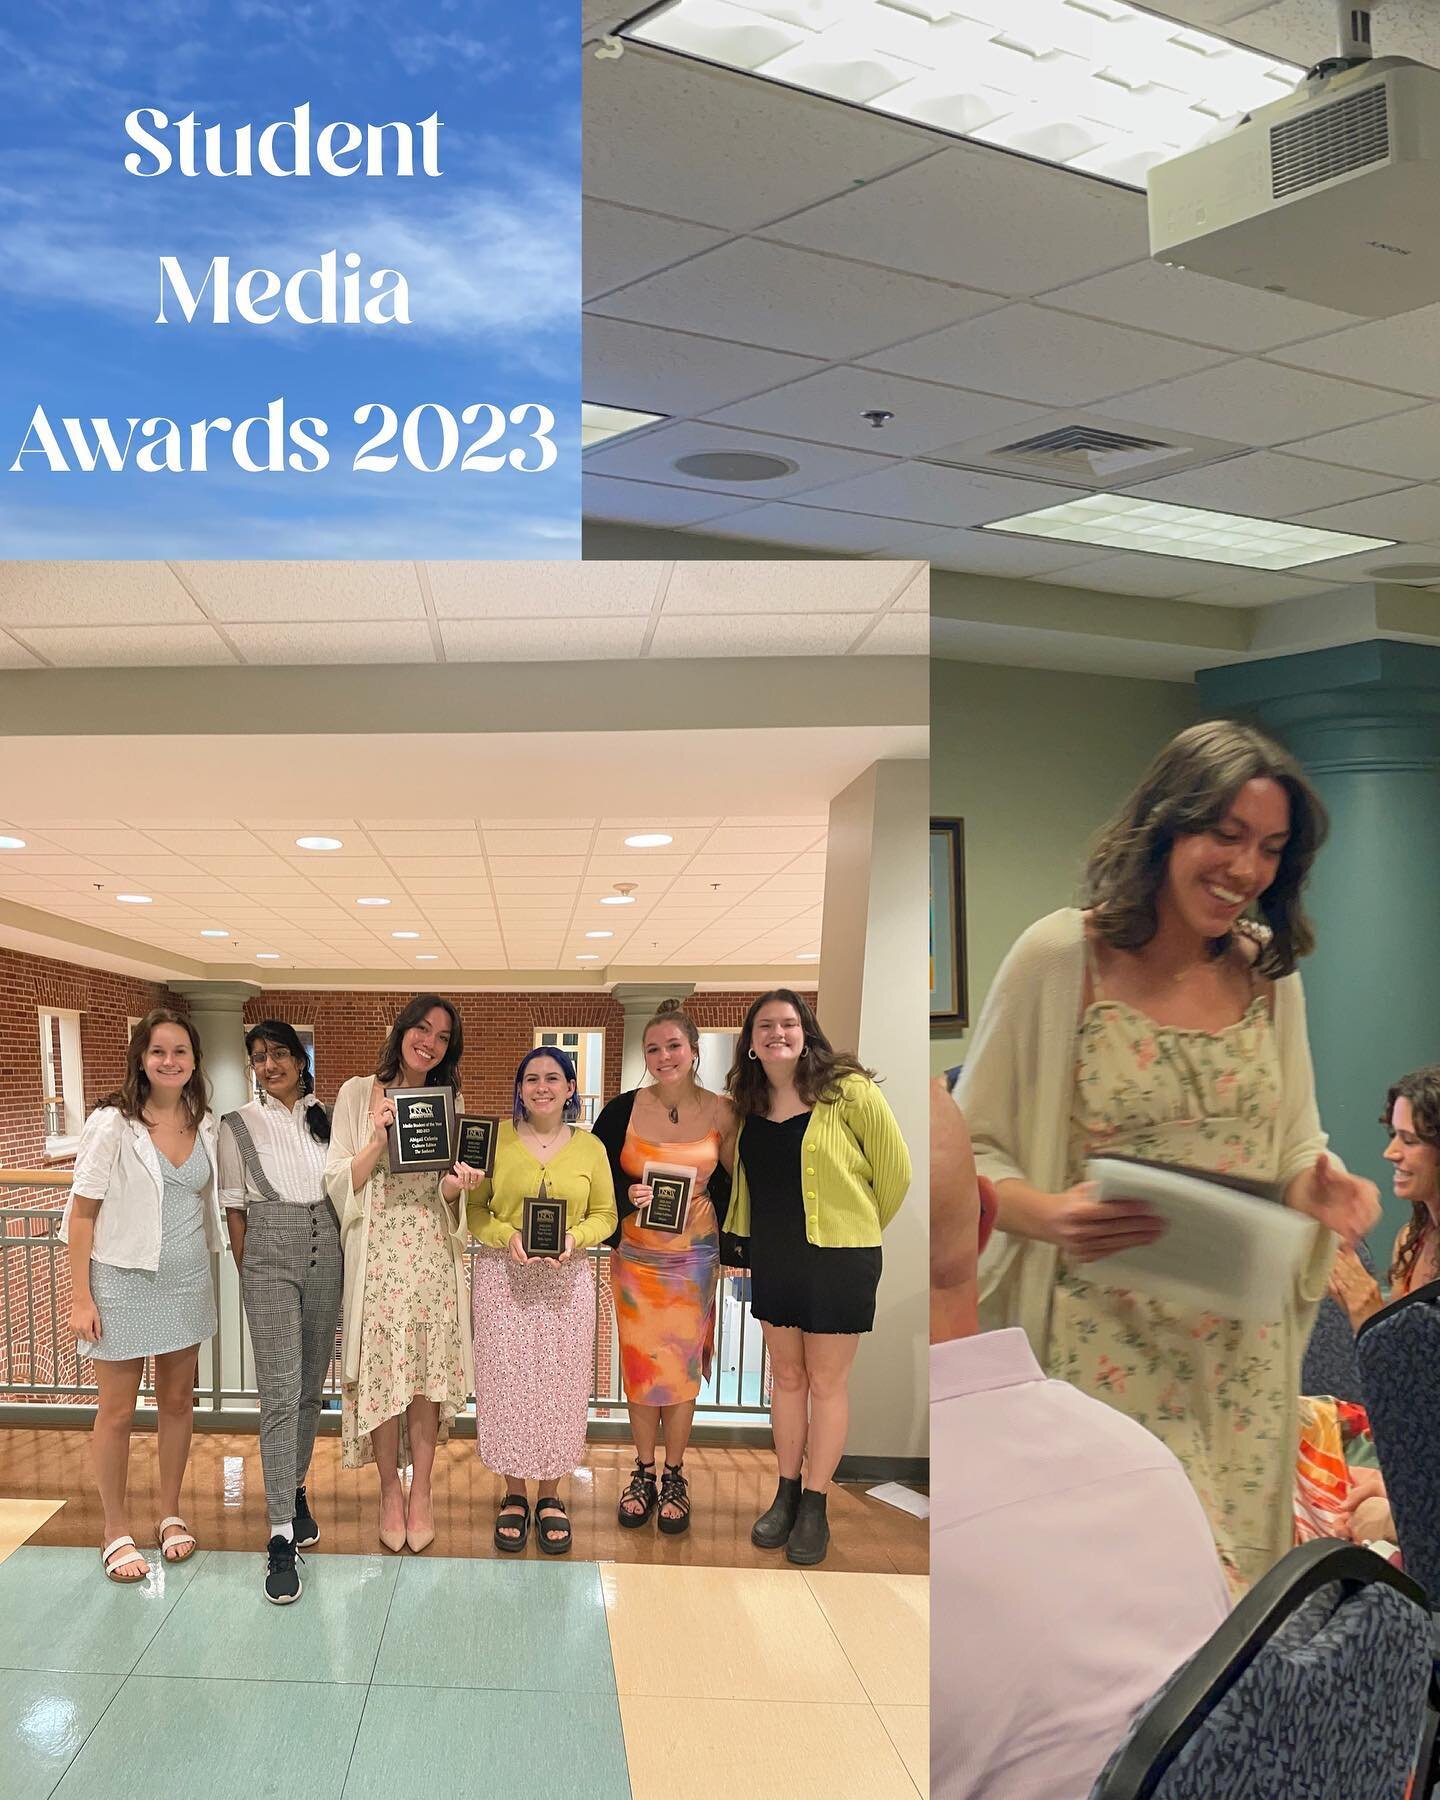 Student Media Awards 2023 last night was a beautiful night with so many amazing people being recognized. We are very proud of our staff members who were nominated and received awards this year. 
Congratulations to Julia Agius for winning the Design a